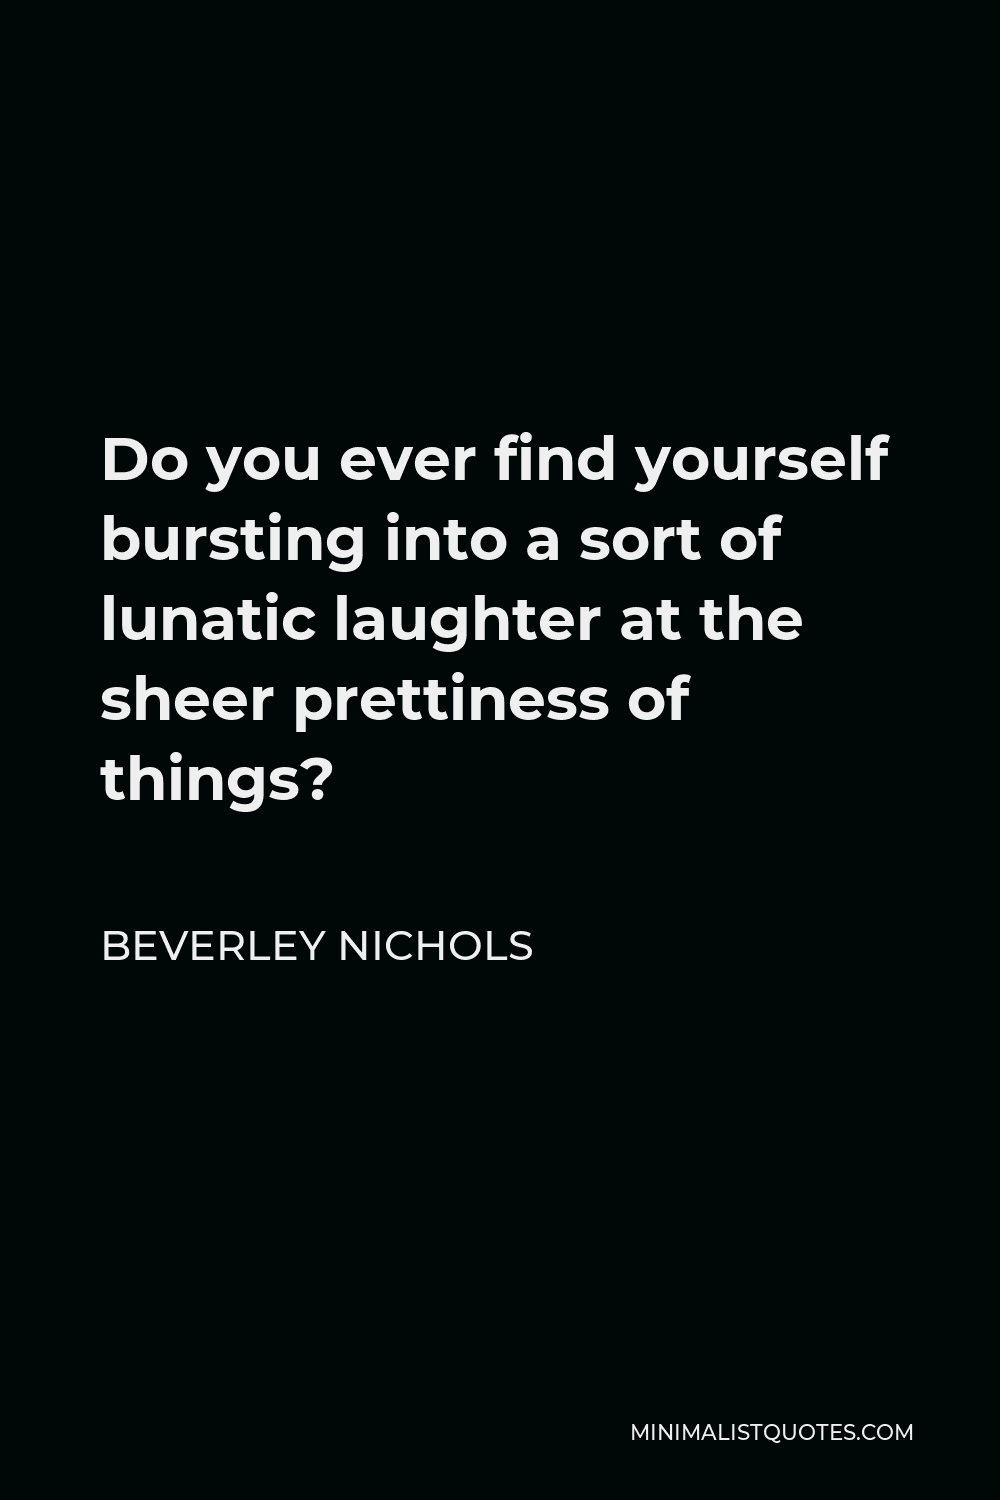 Beverley Nichols Quote - Do you ever find yourself bursting into a sort of lunatic laughter at the sheer prettiness of things?